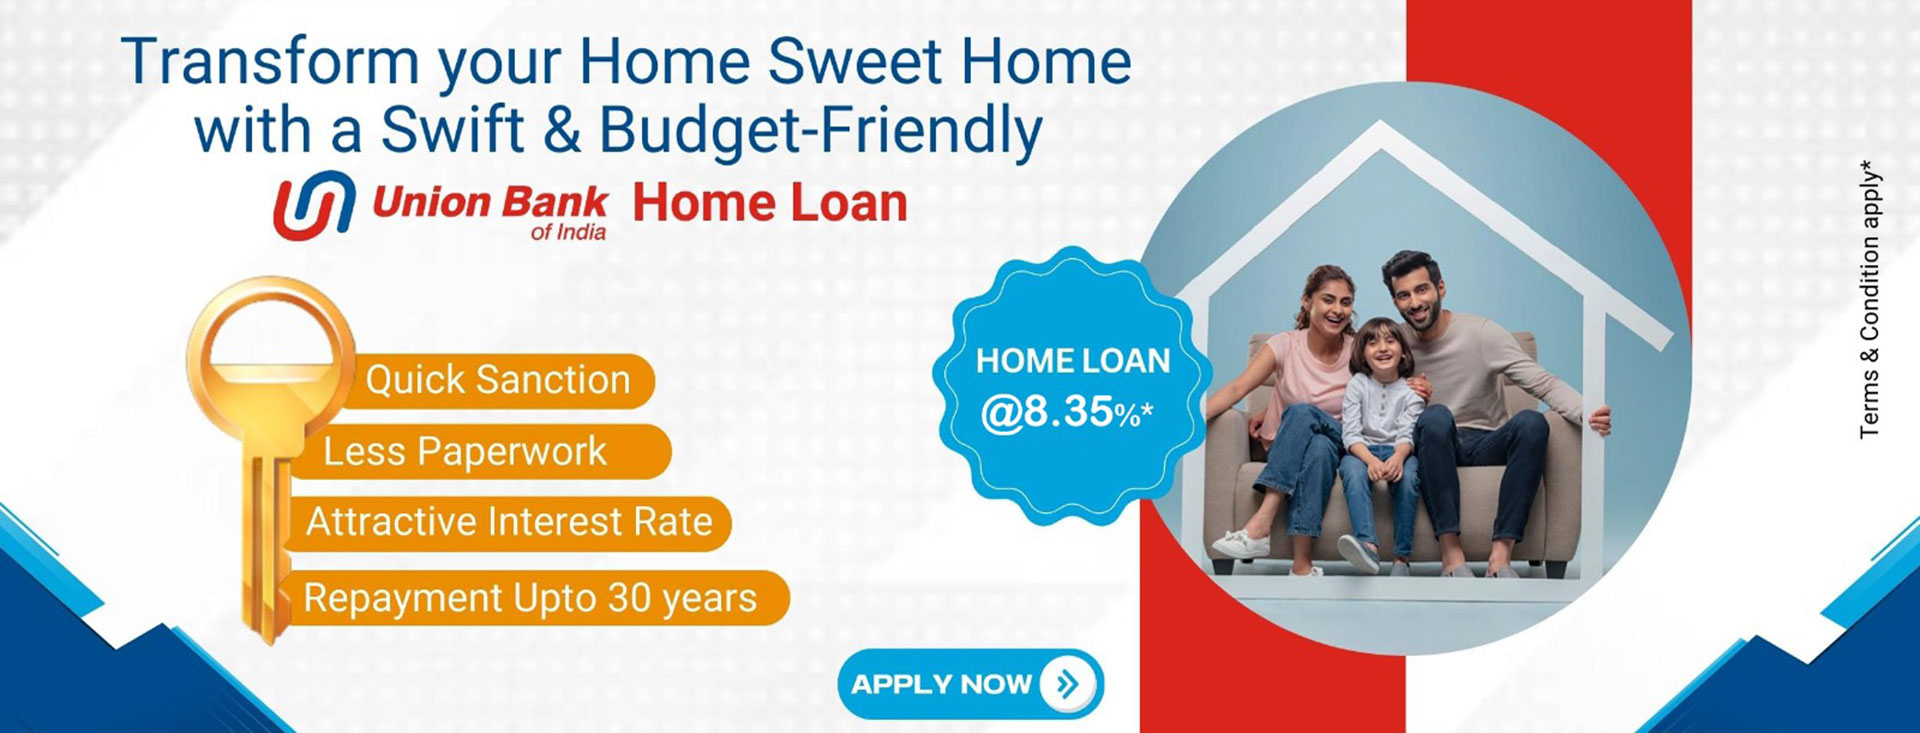 Sweet-Happy-Family-Mother-Father-Daughters-Home-Loan-UBISL